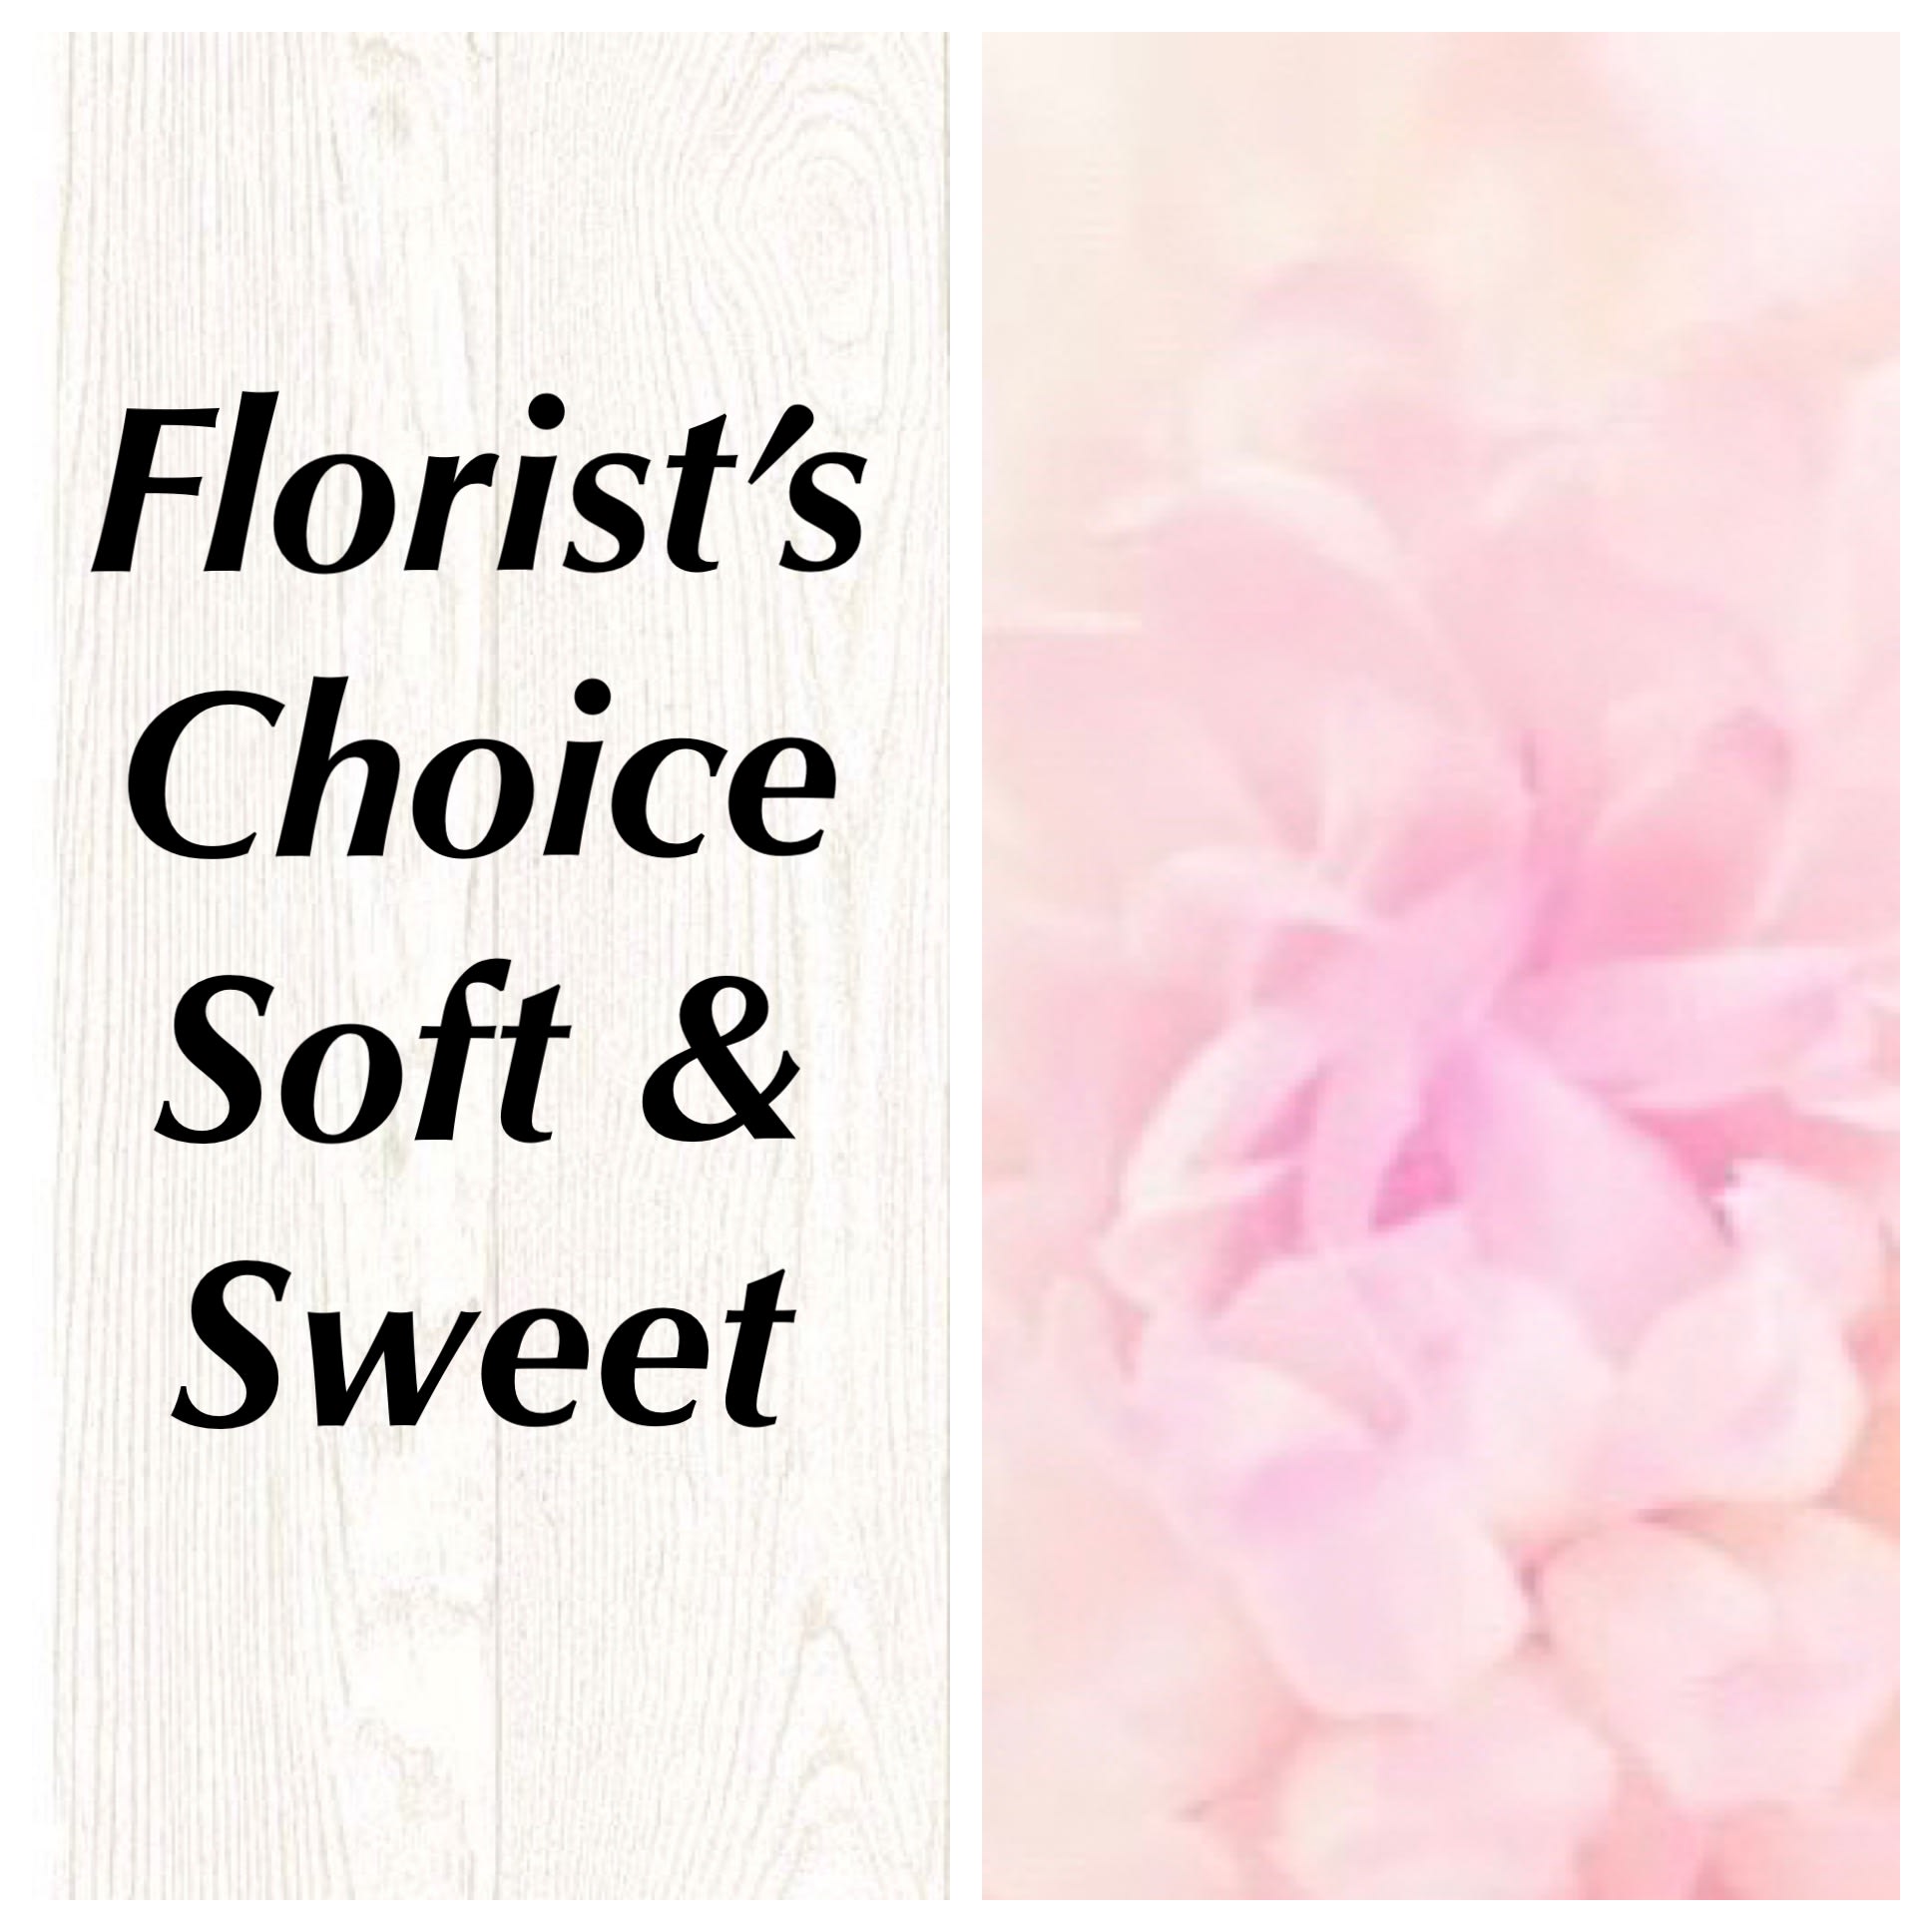 Florist’s Choice Soft &amp; Sweet - Our florists will design a beautiful bouquet for your special someone. For this bouquet we will choose from our soft, light, colored seasonal blossoms and arrange a sweet mix. 